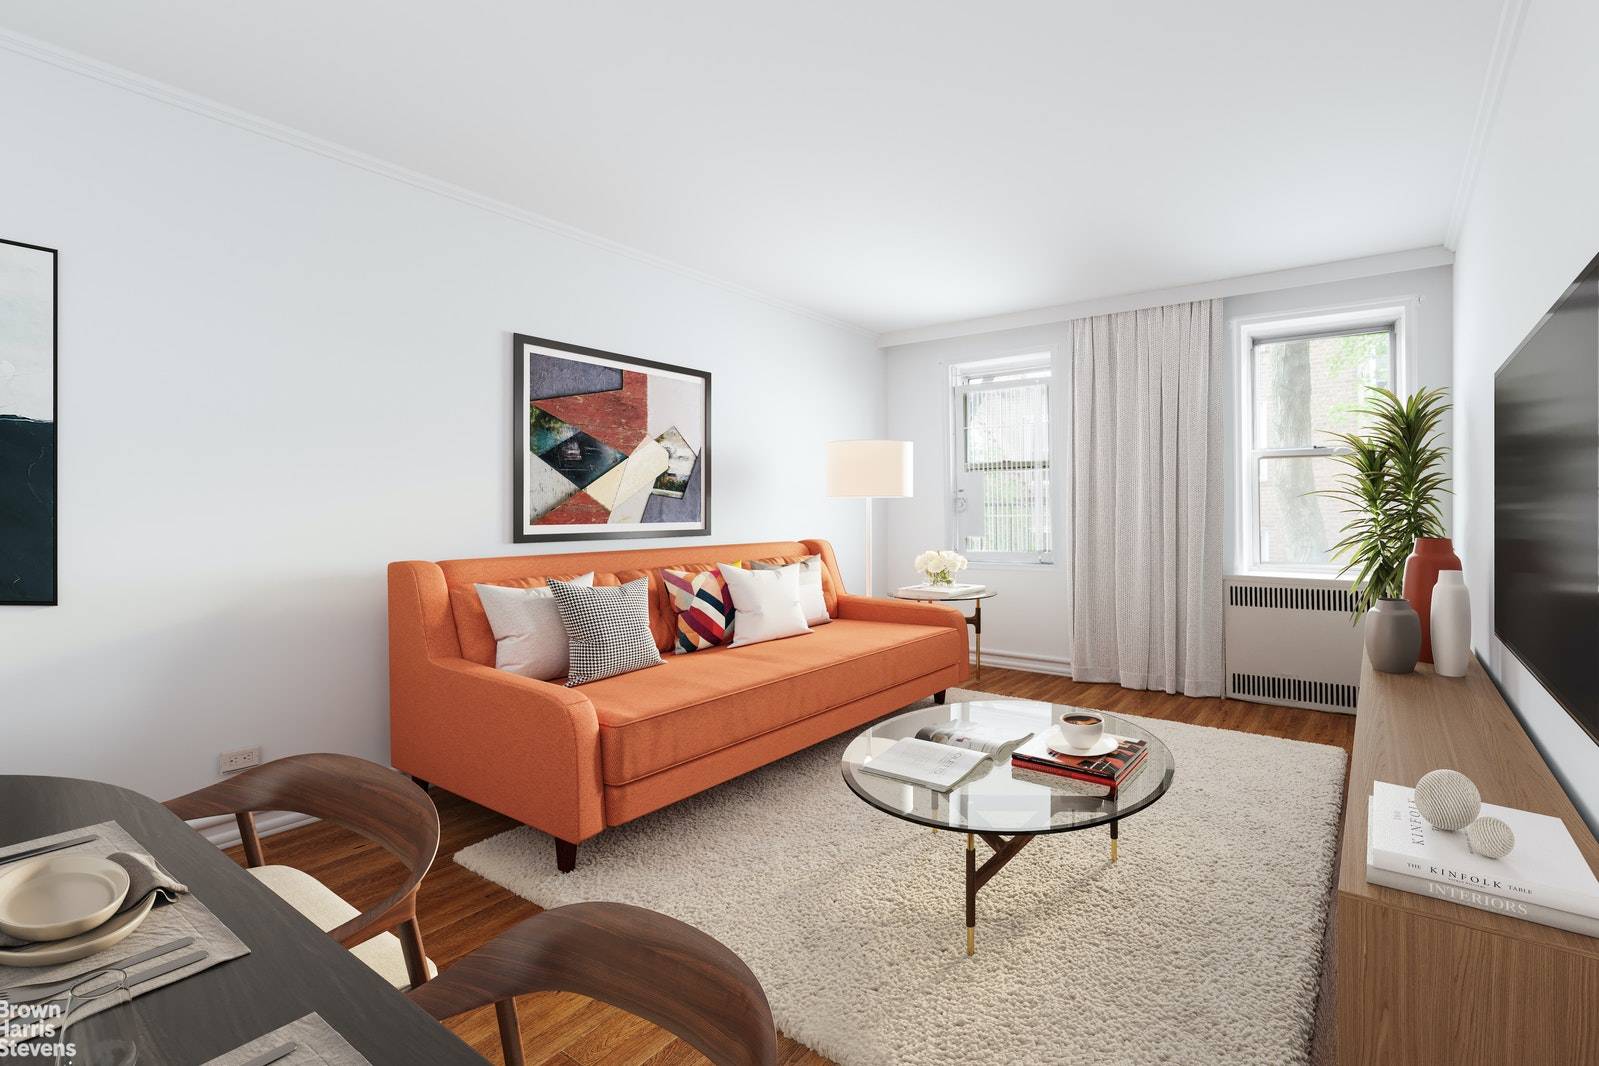 Unit 3F at 140 East 2nd is a spacious one bedroom located in charming Windsor Terrace.